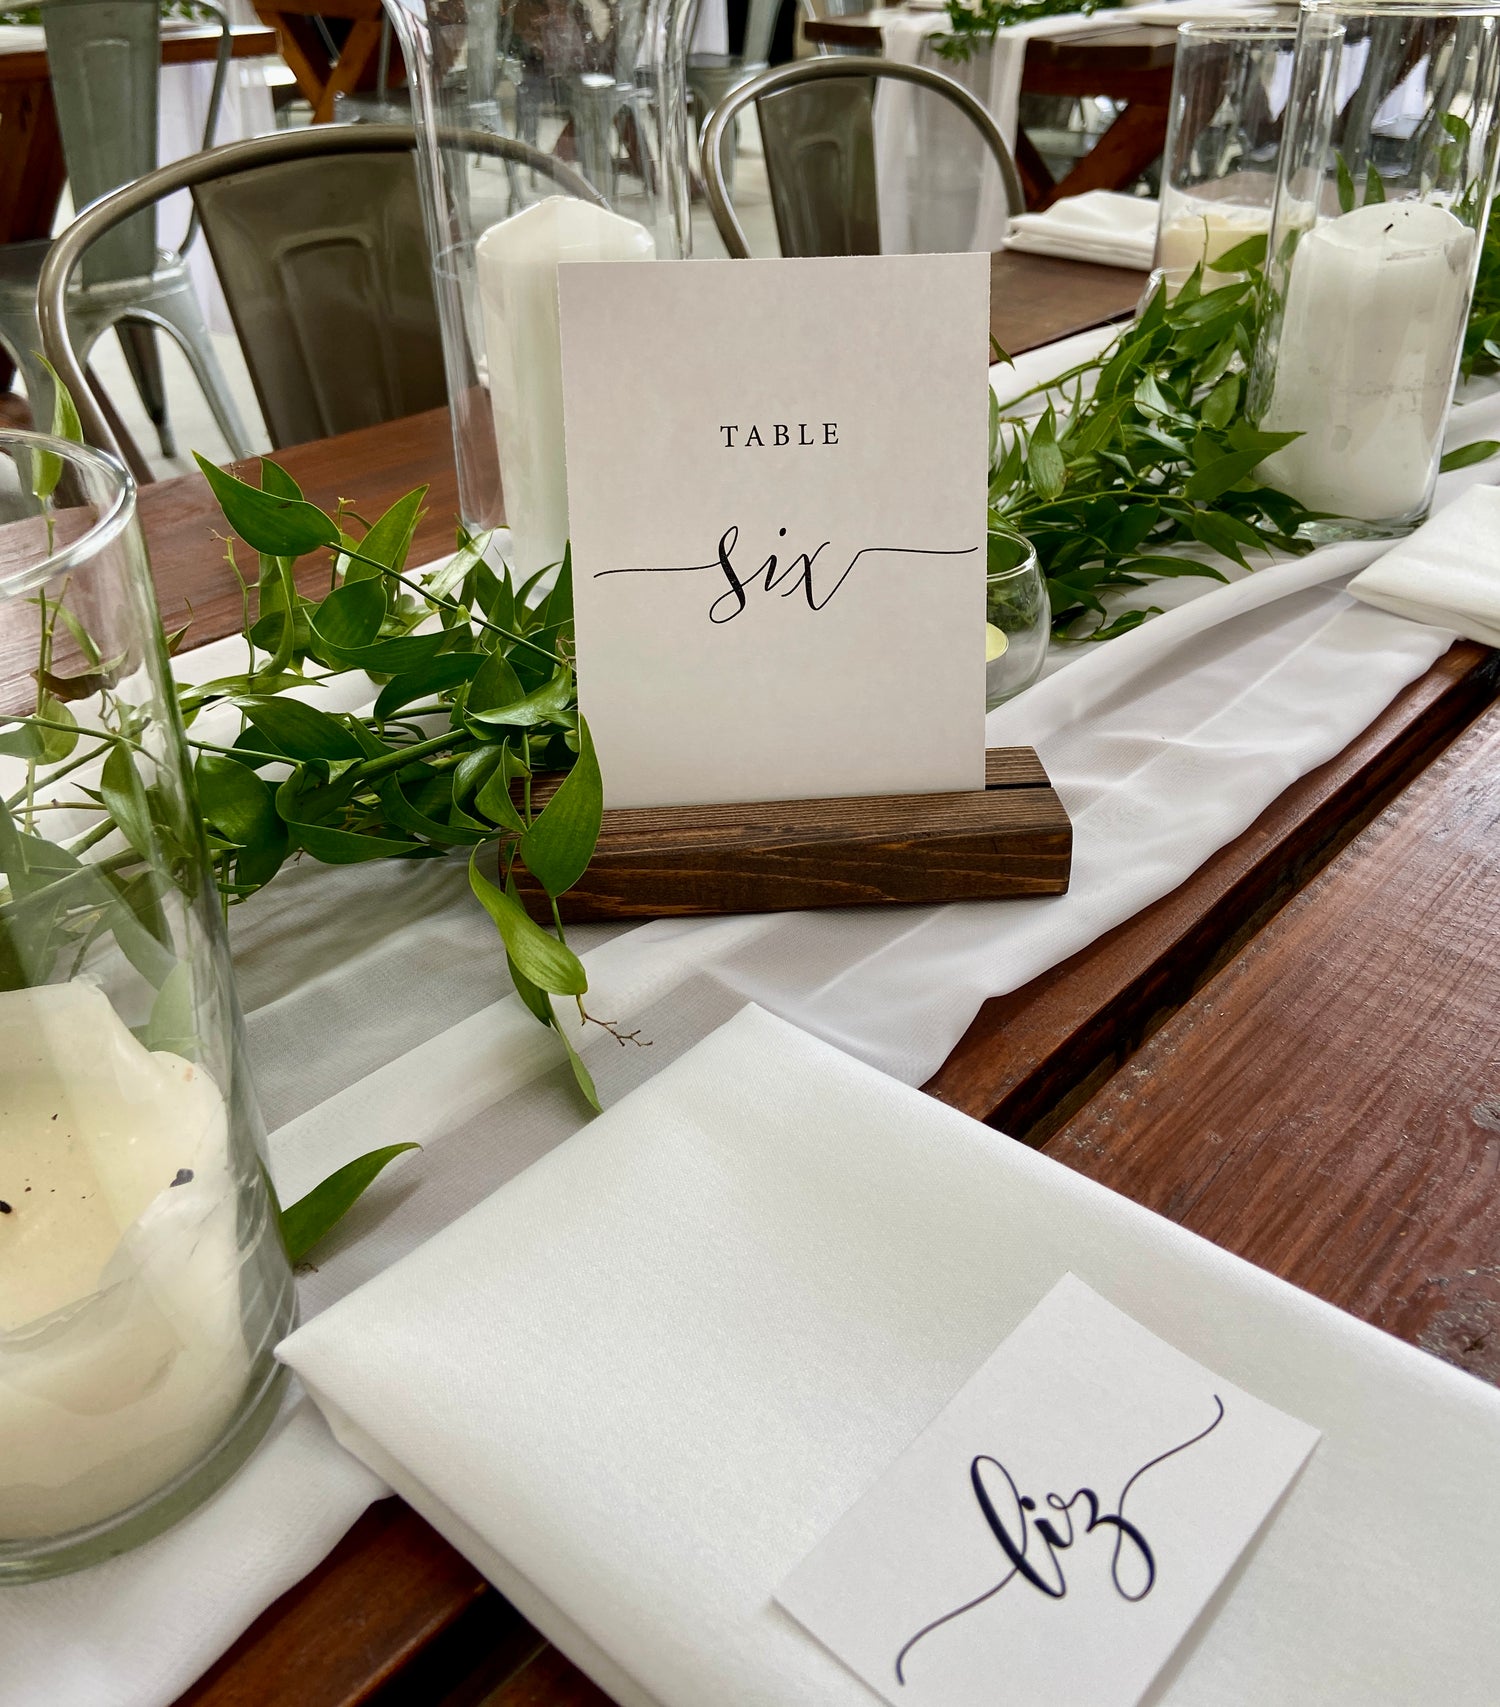 Table Number Rentals